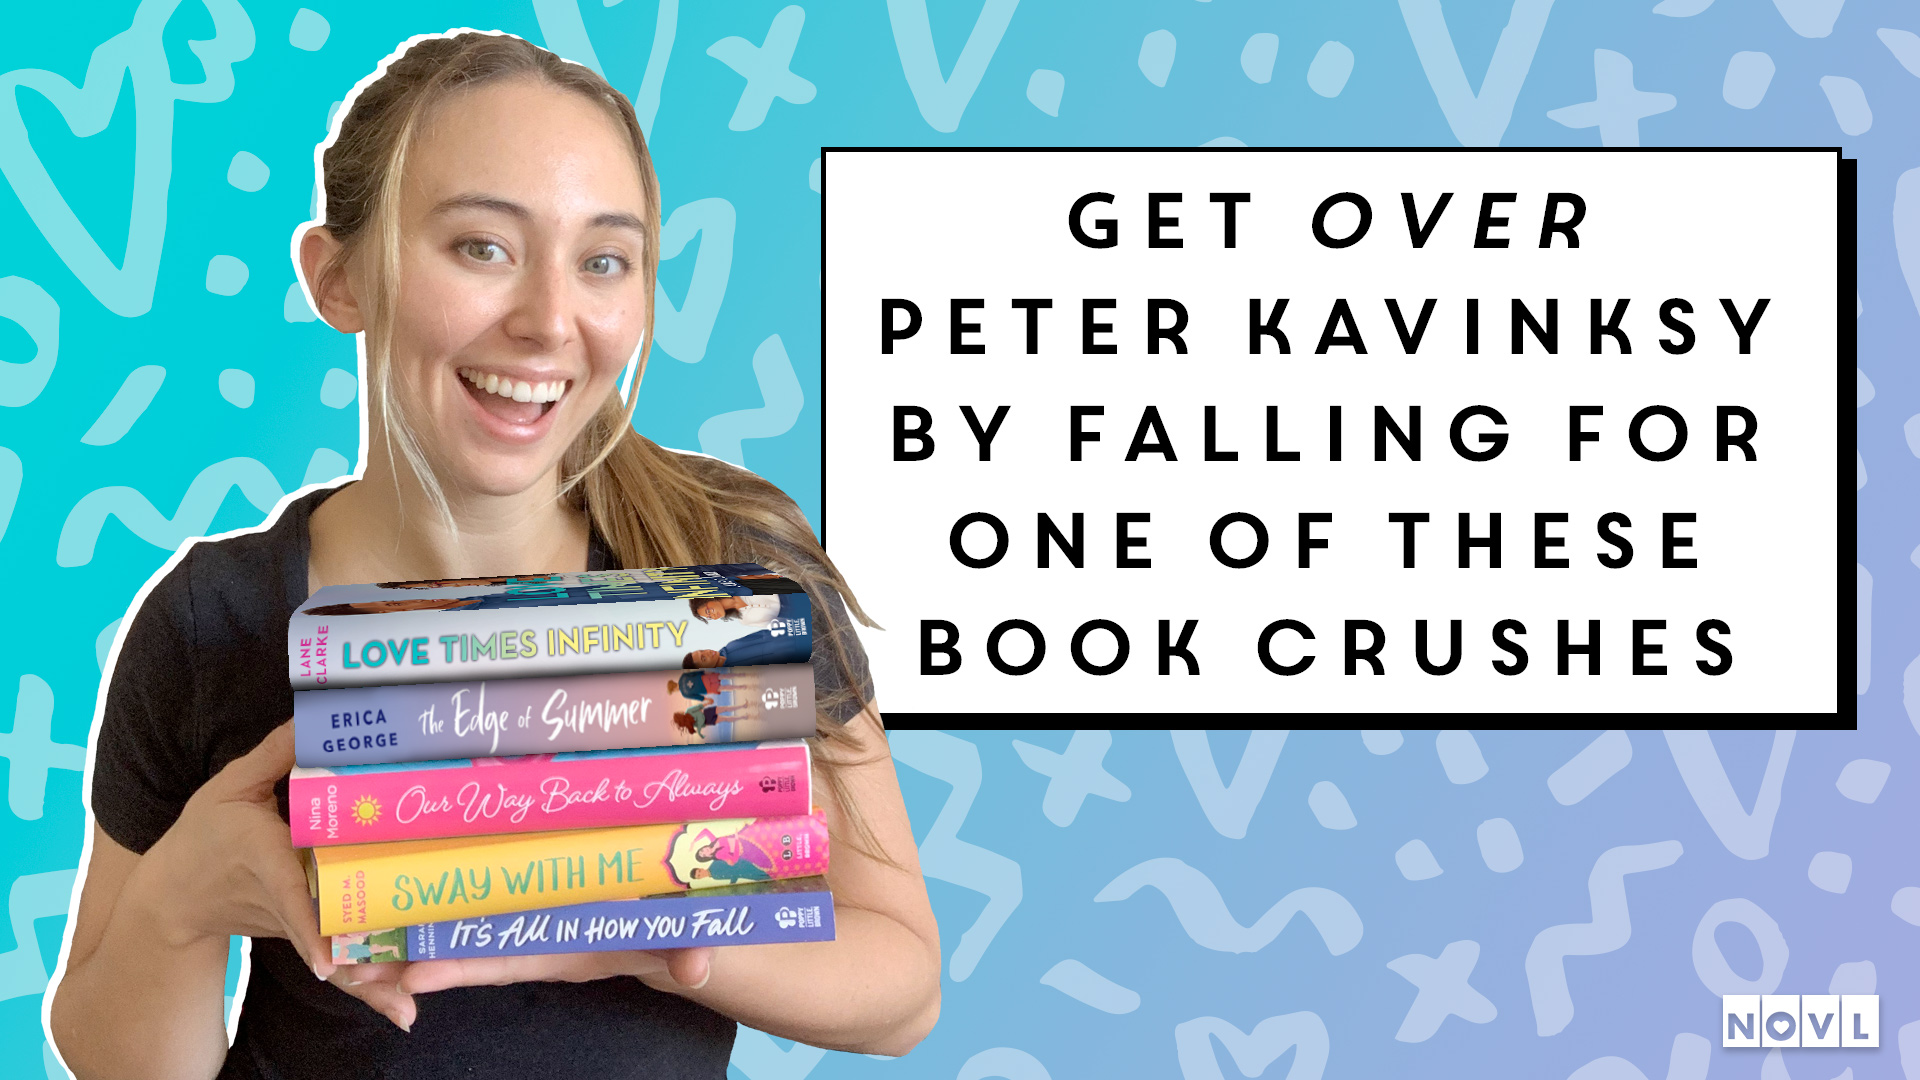 The NOVL Blog, Featured Image for Article: Get OVER Peter Kavinksy by Falling for One of These Book Crushes